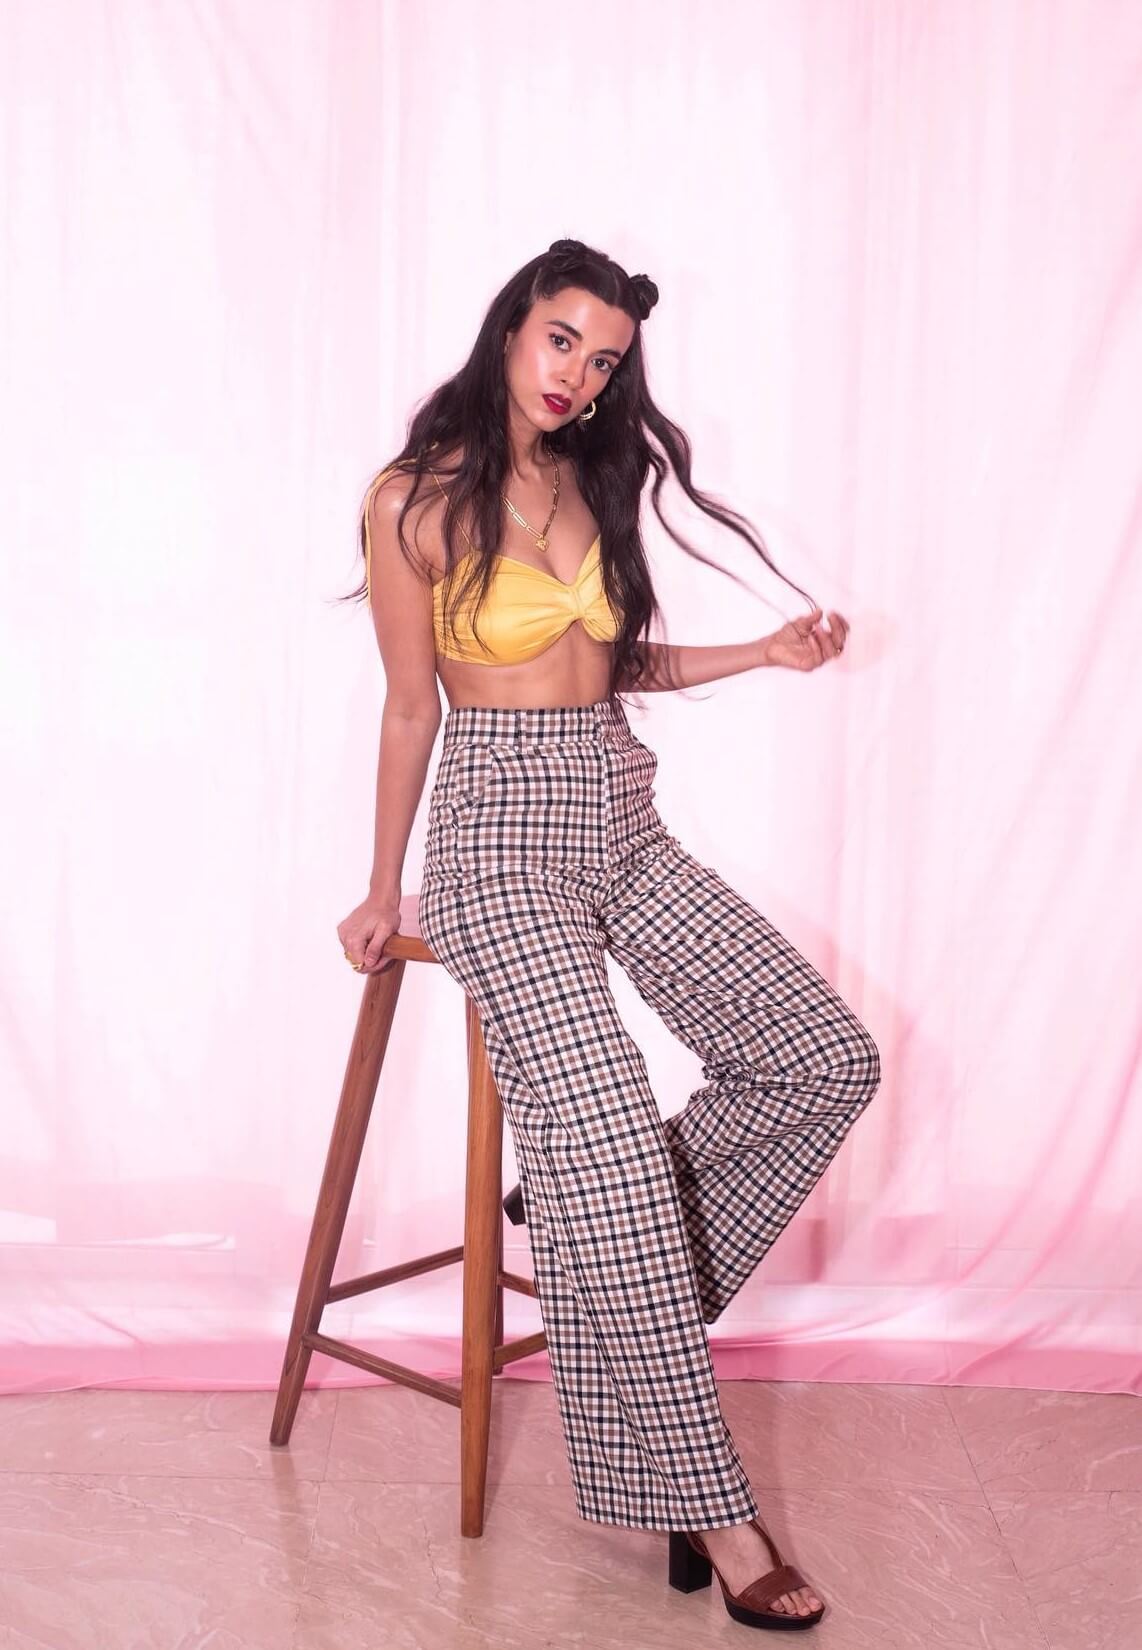 Glamorous Saba in a Cute Yellow Crop Top and Plaid Trousers